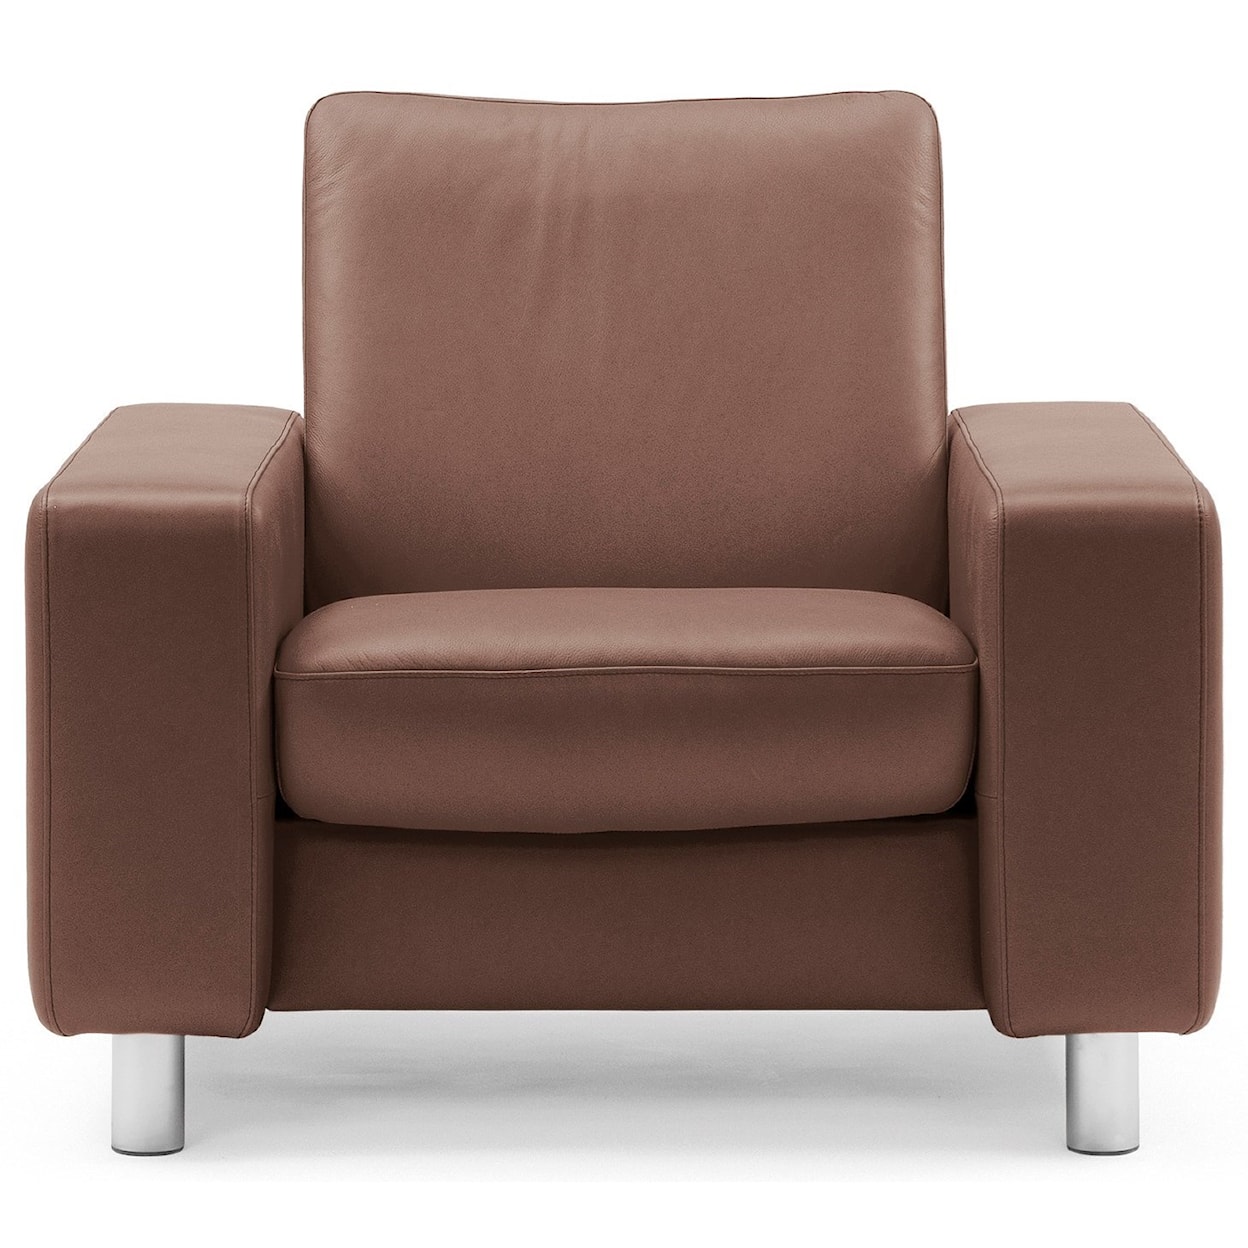 Stressless Arion 19 - A20 Low-Back Reclining Chair